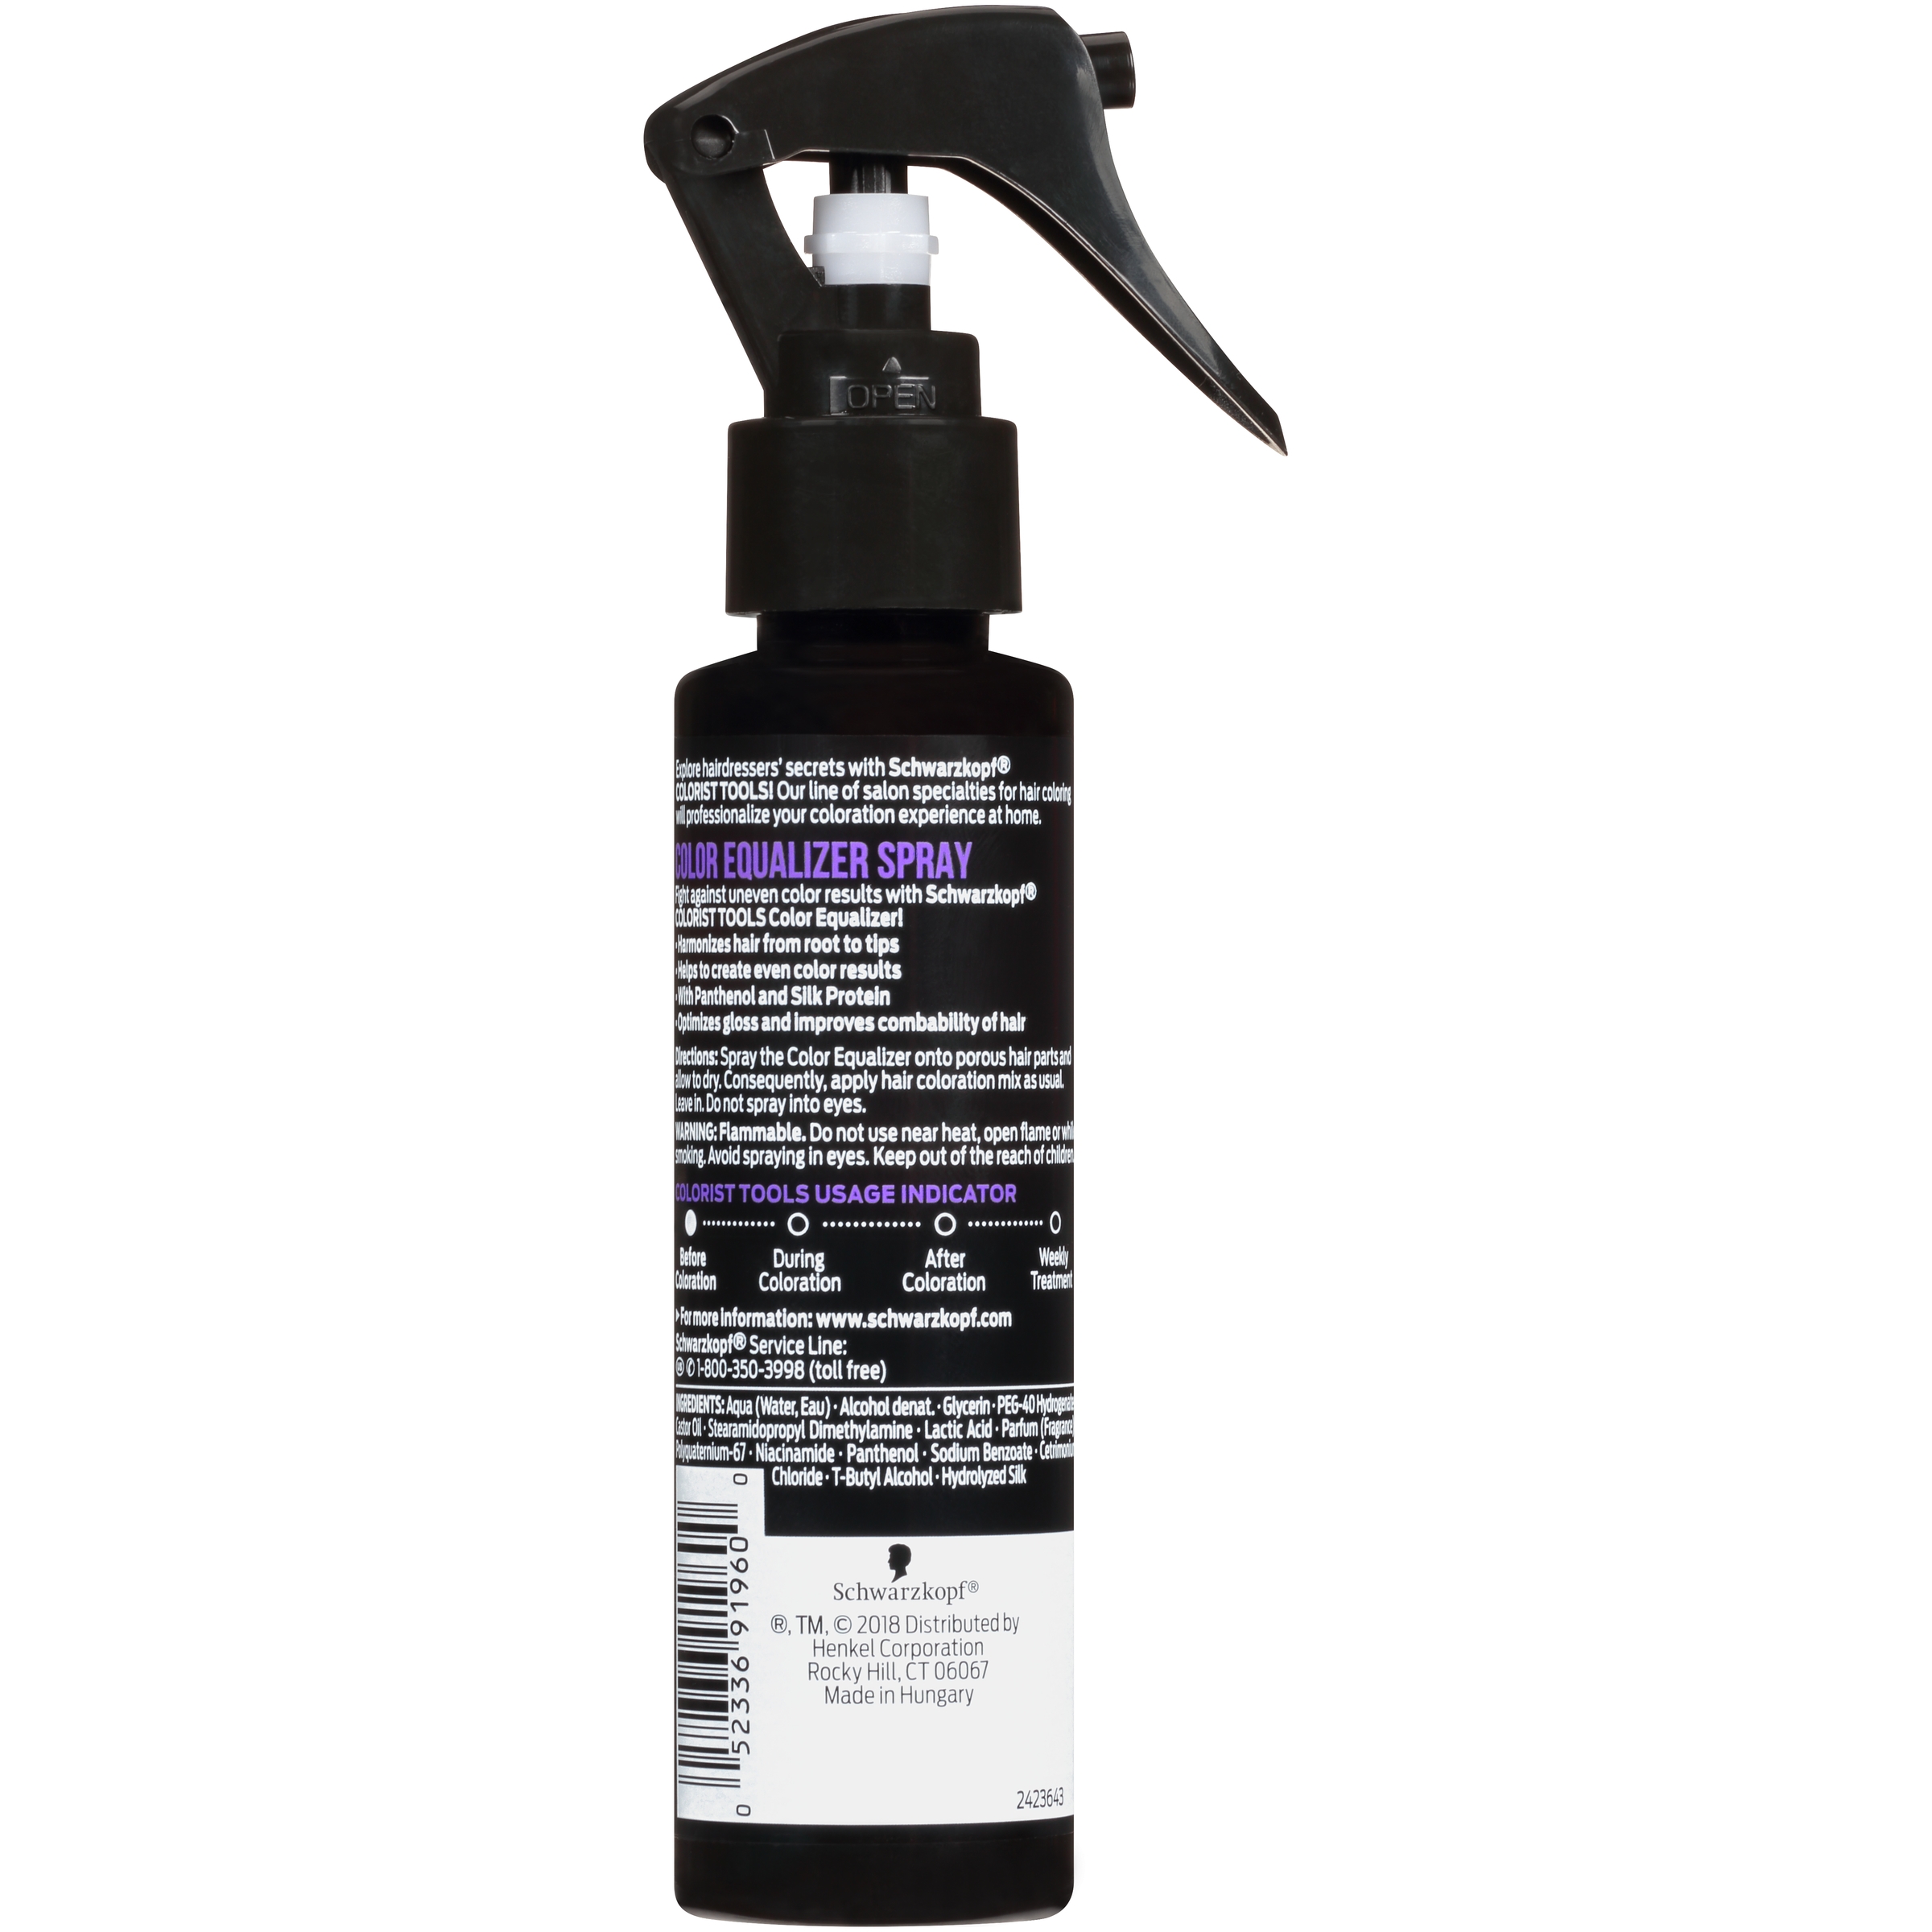 Schwarzkopf Colorist Tools Hair Dye Color Equalizer Spray, 3.38 ounce - image 3 of 7